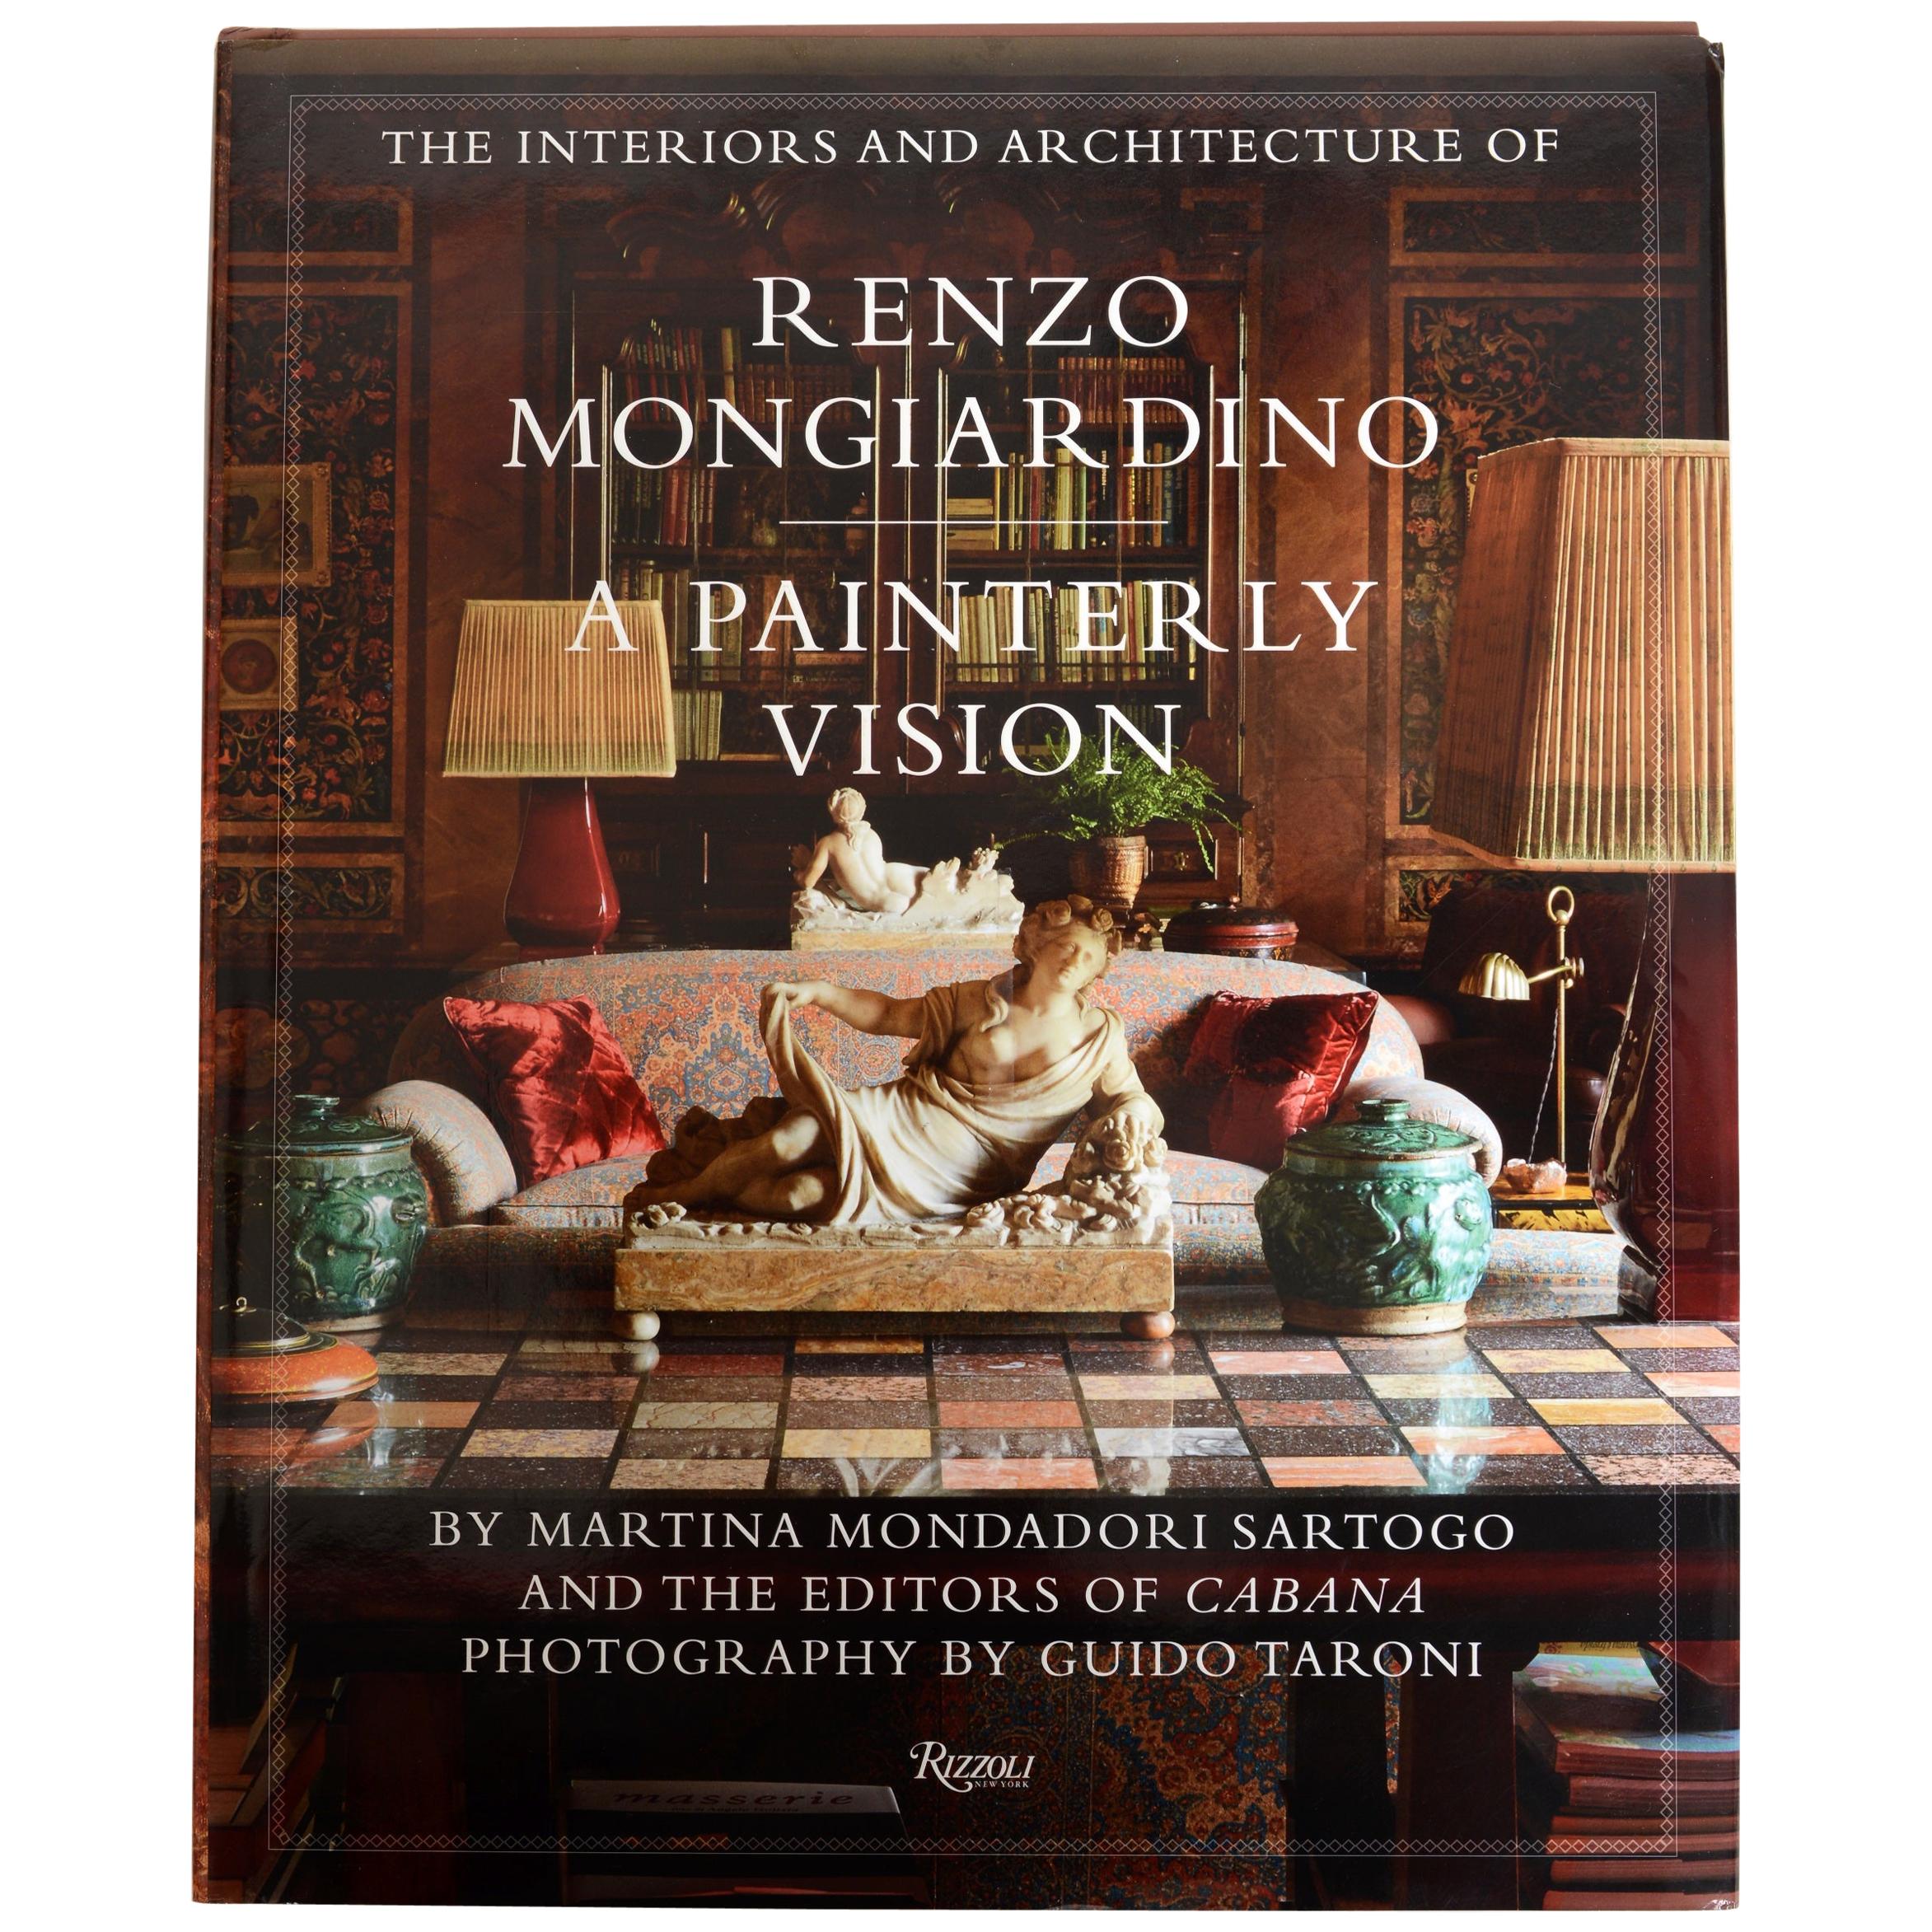 The Interiors and Architecture of Renzo Mongiardino: A Painterly Vision